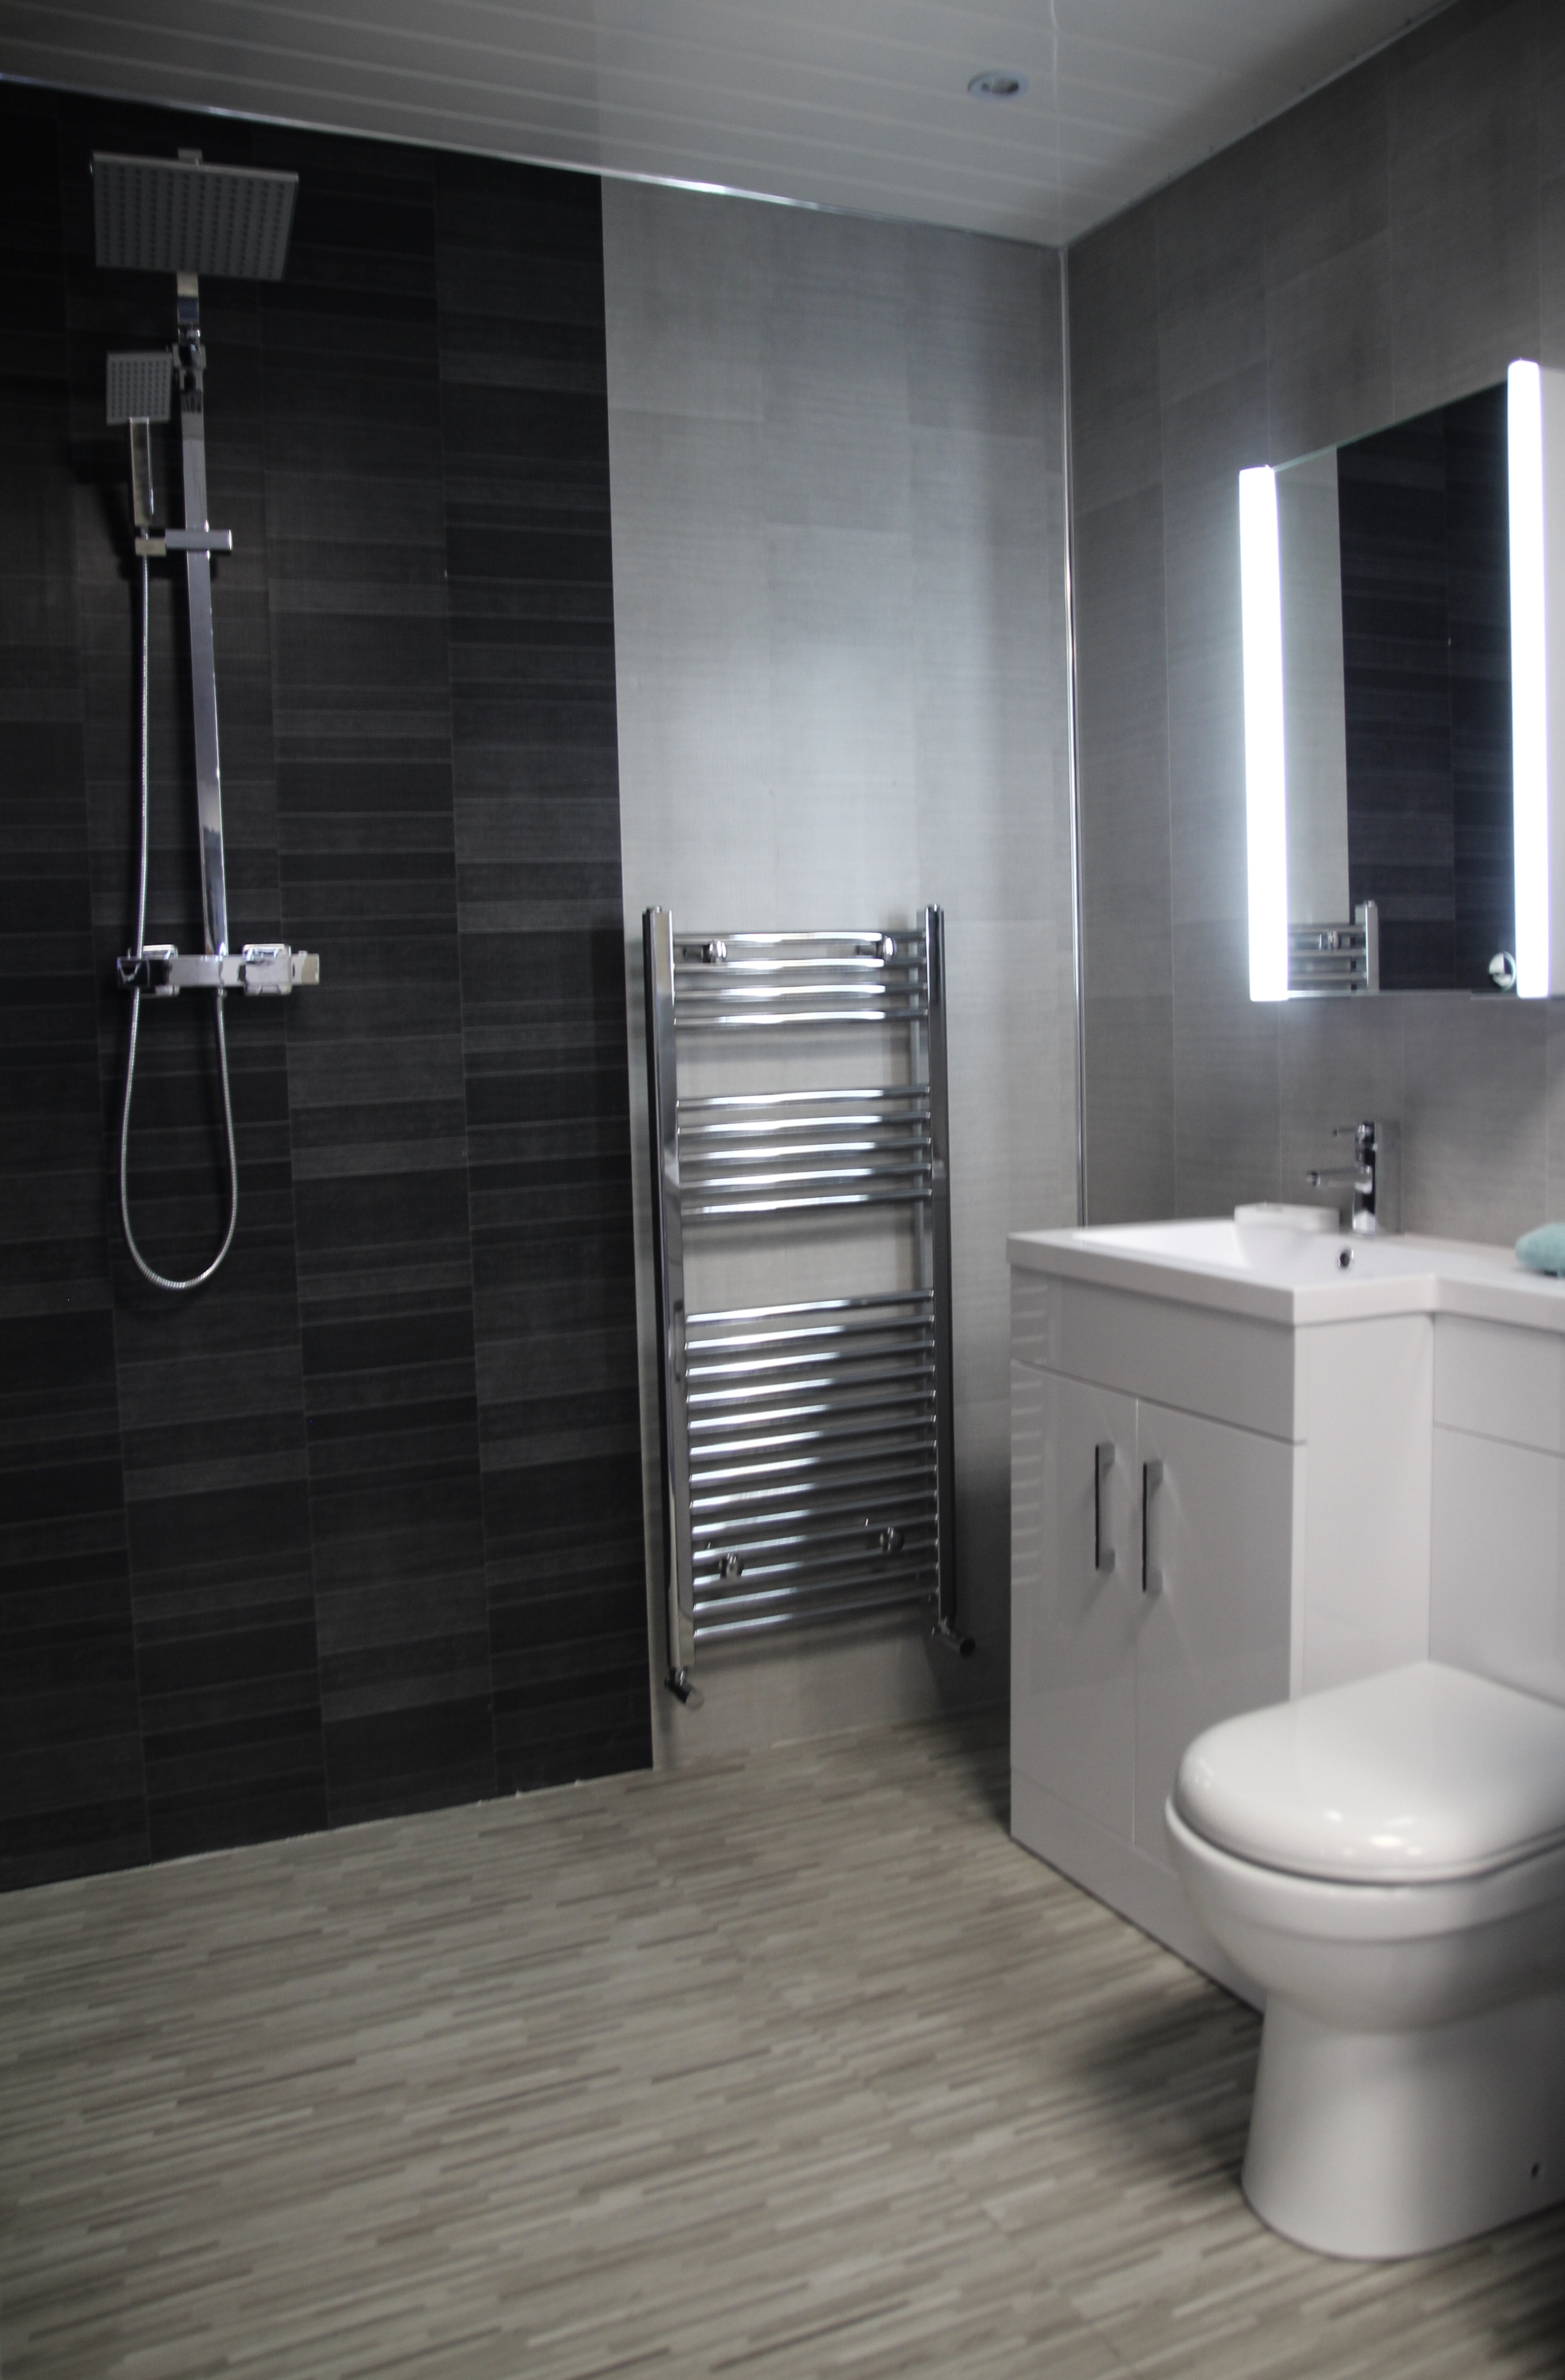 Bay R2 Bay R2 Bathroom Products Bathrooms Products Bath Giant intended for dimensions 3409 X 5184